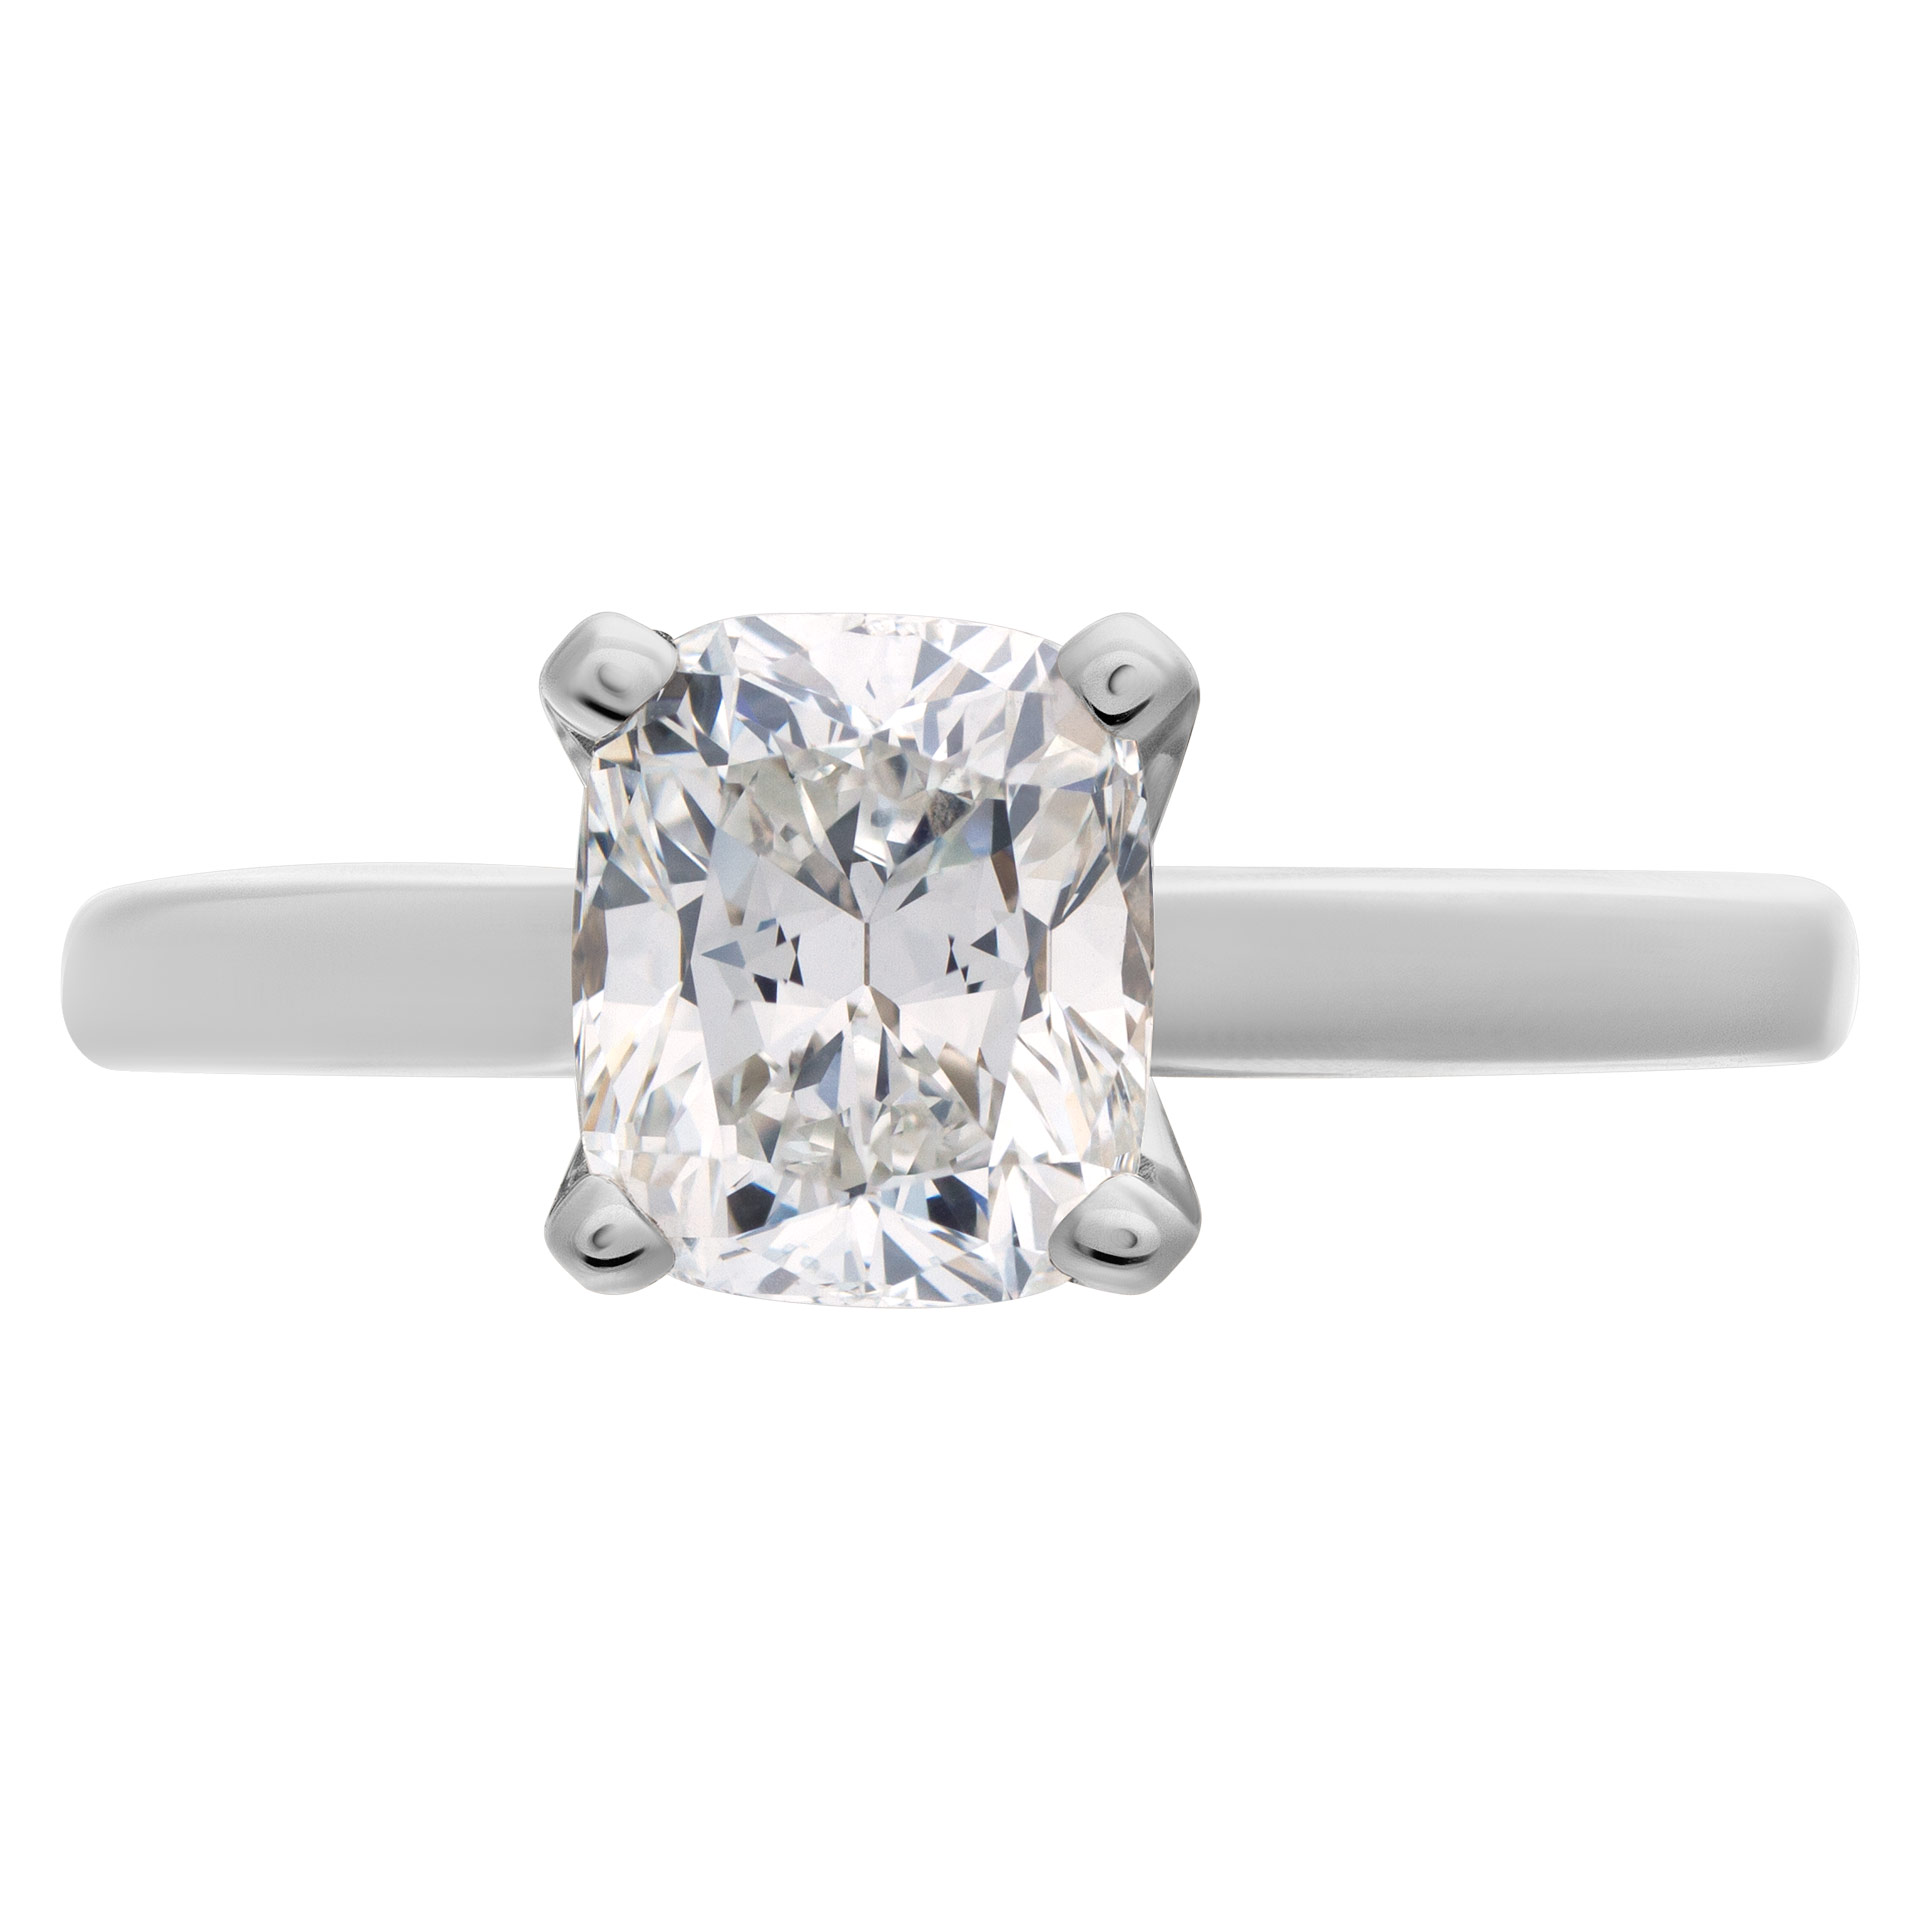 GIA certified cushion brilliant cut diamond 1.55 carat (H color, VS2 clarity) solitaire ring image 1